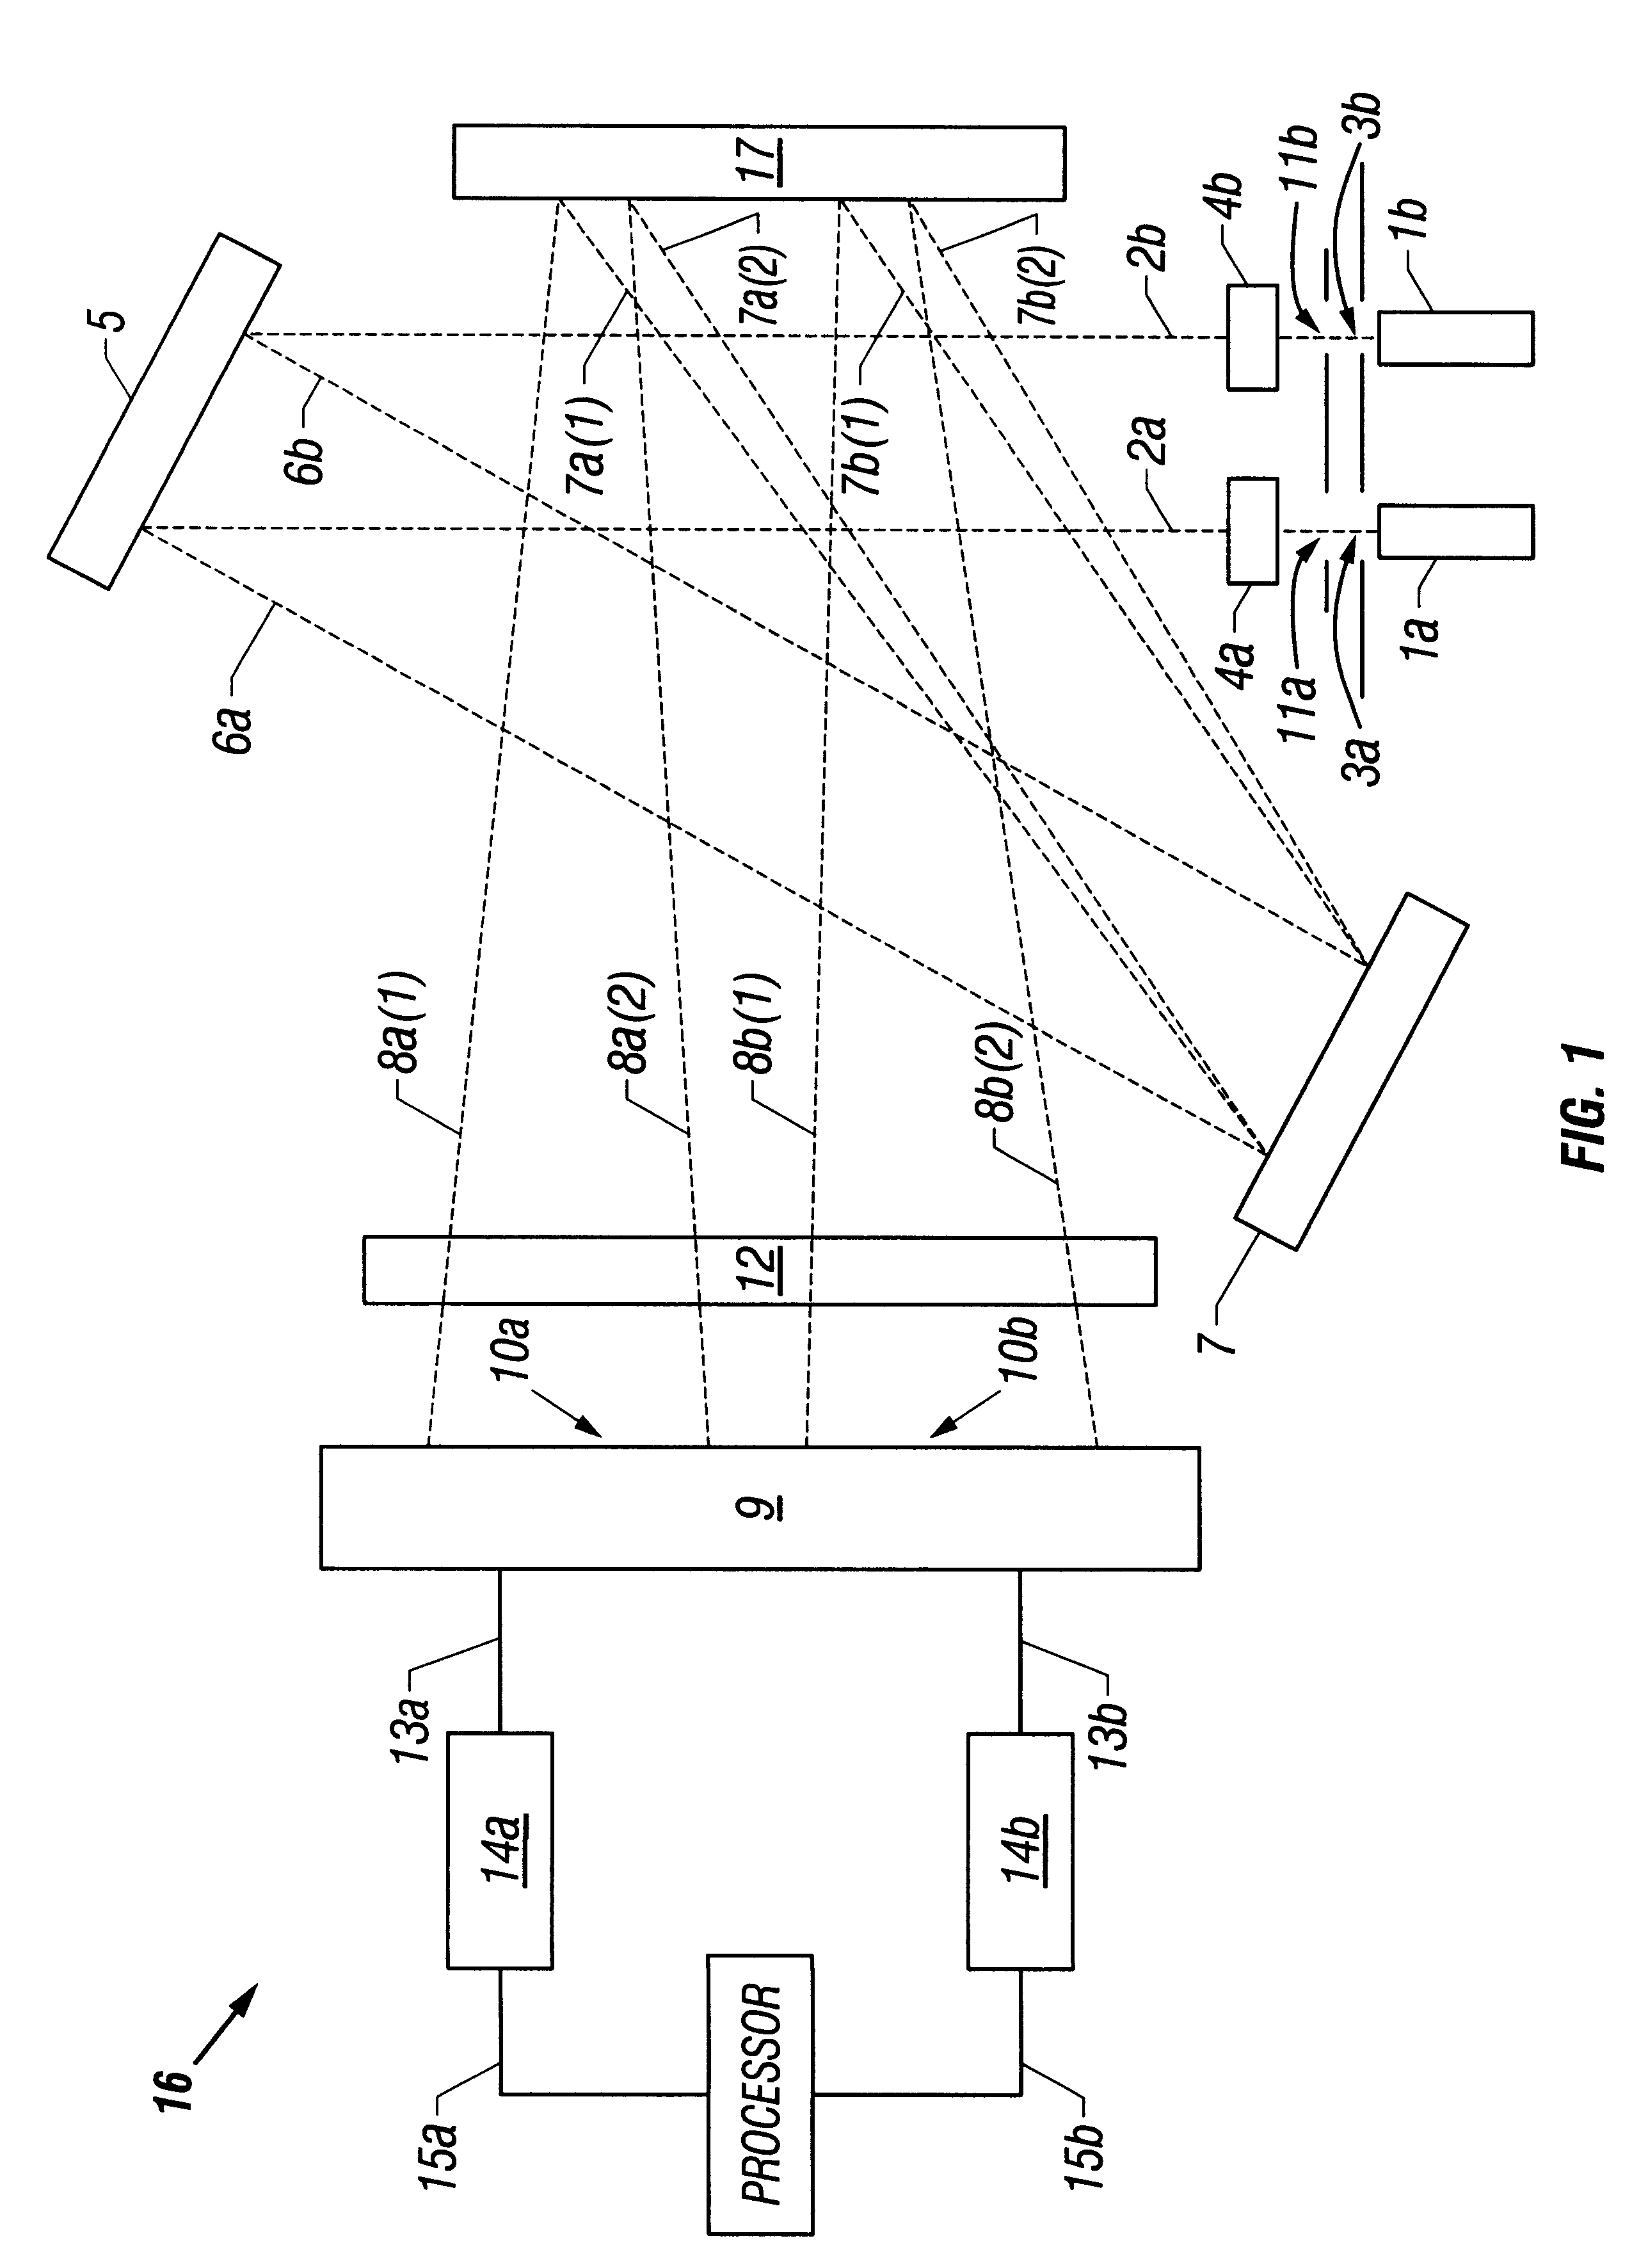 Spectrometer configured to provide simultaneous multiple intensity spectra from independent light sources